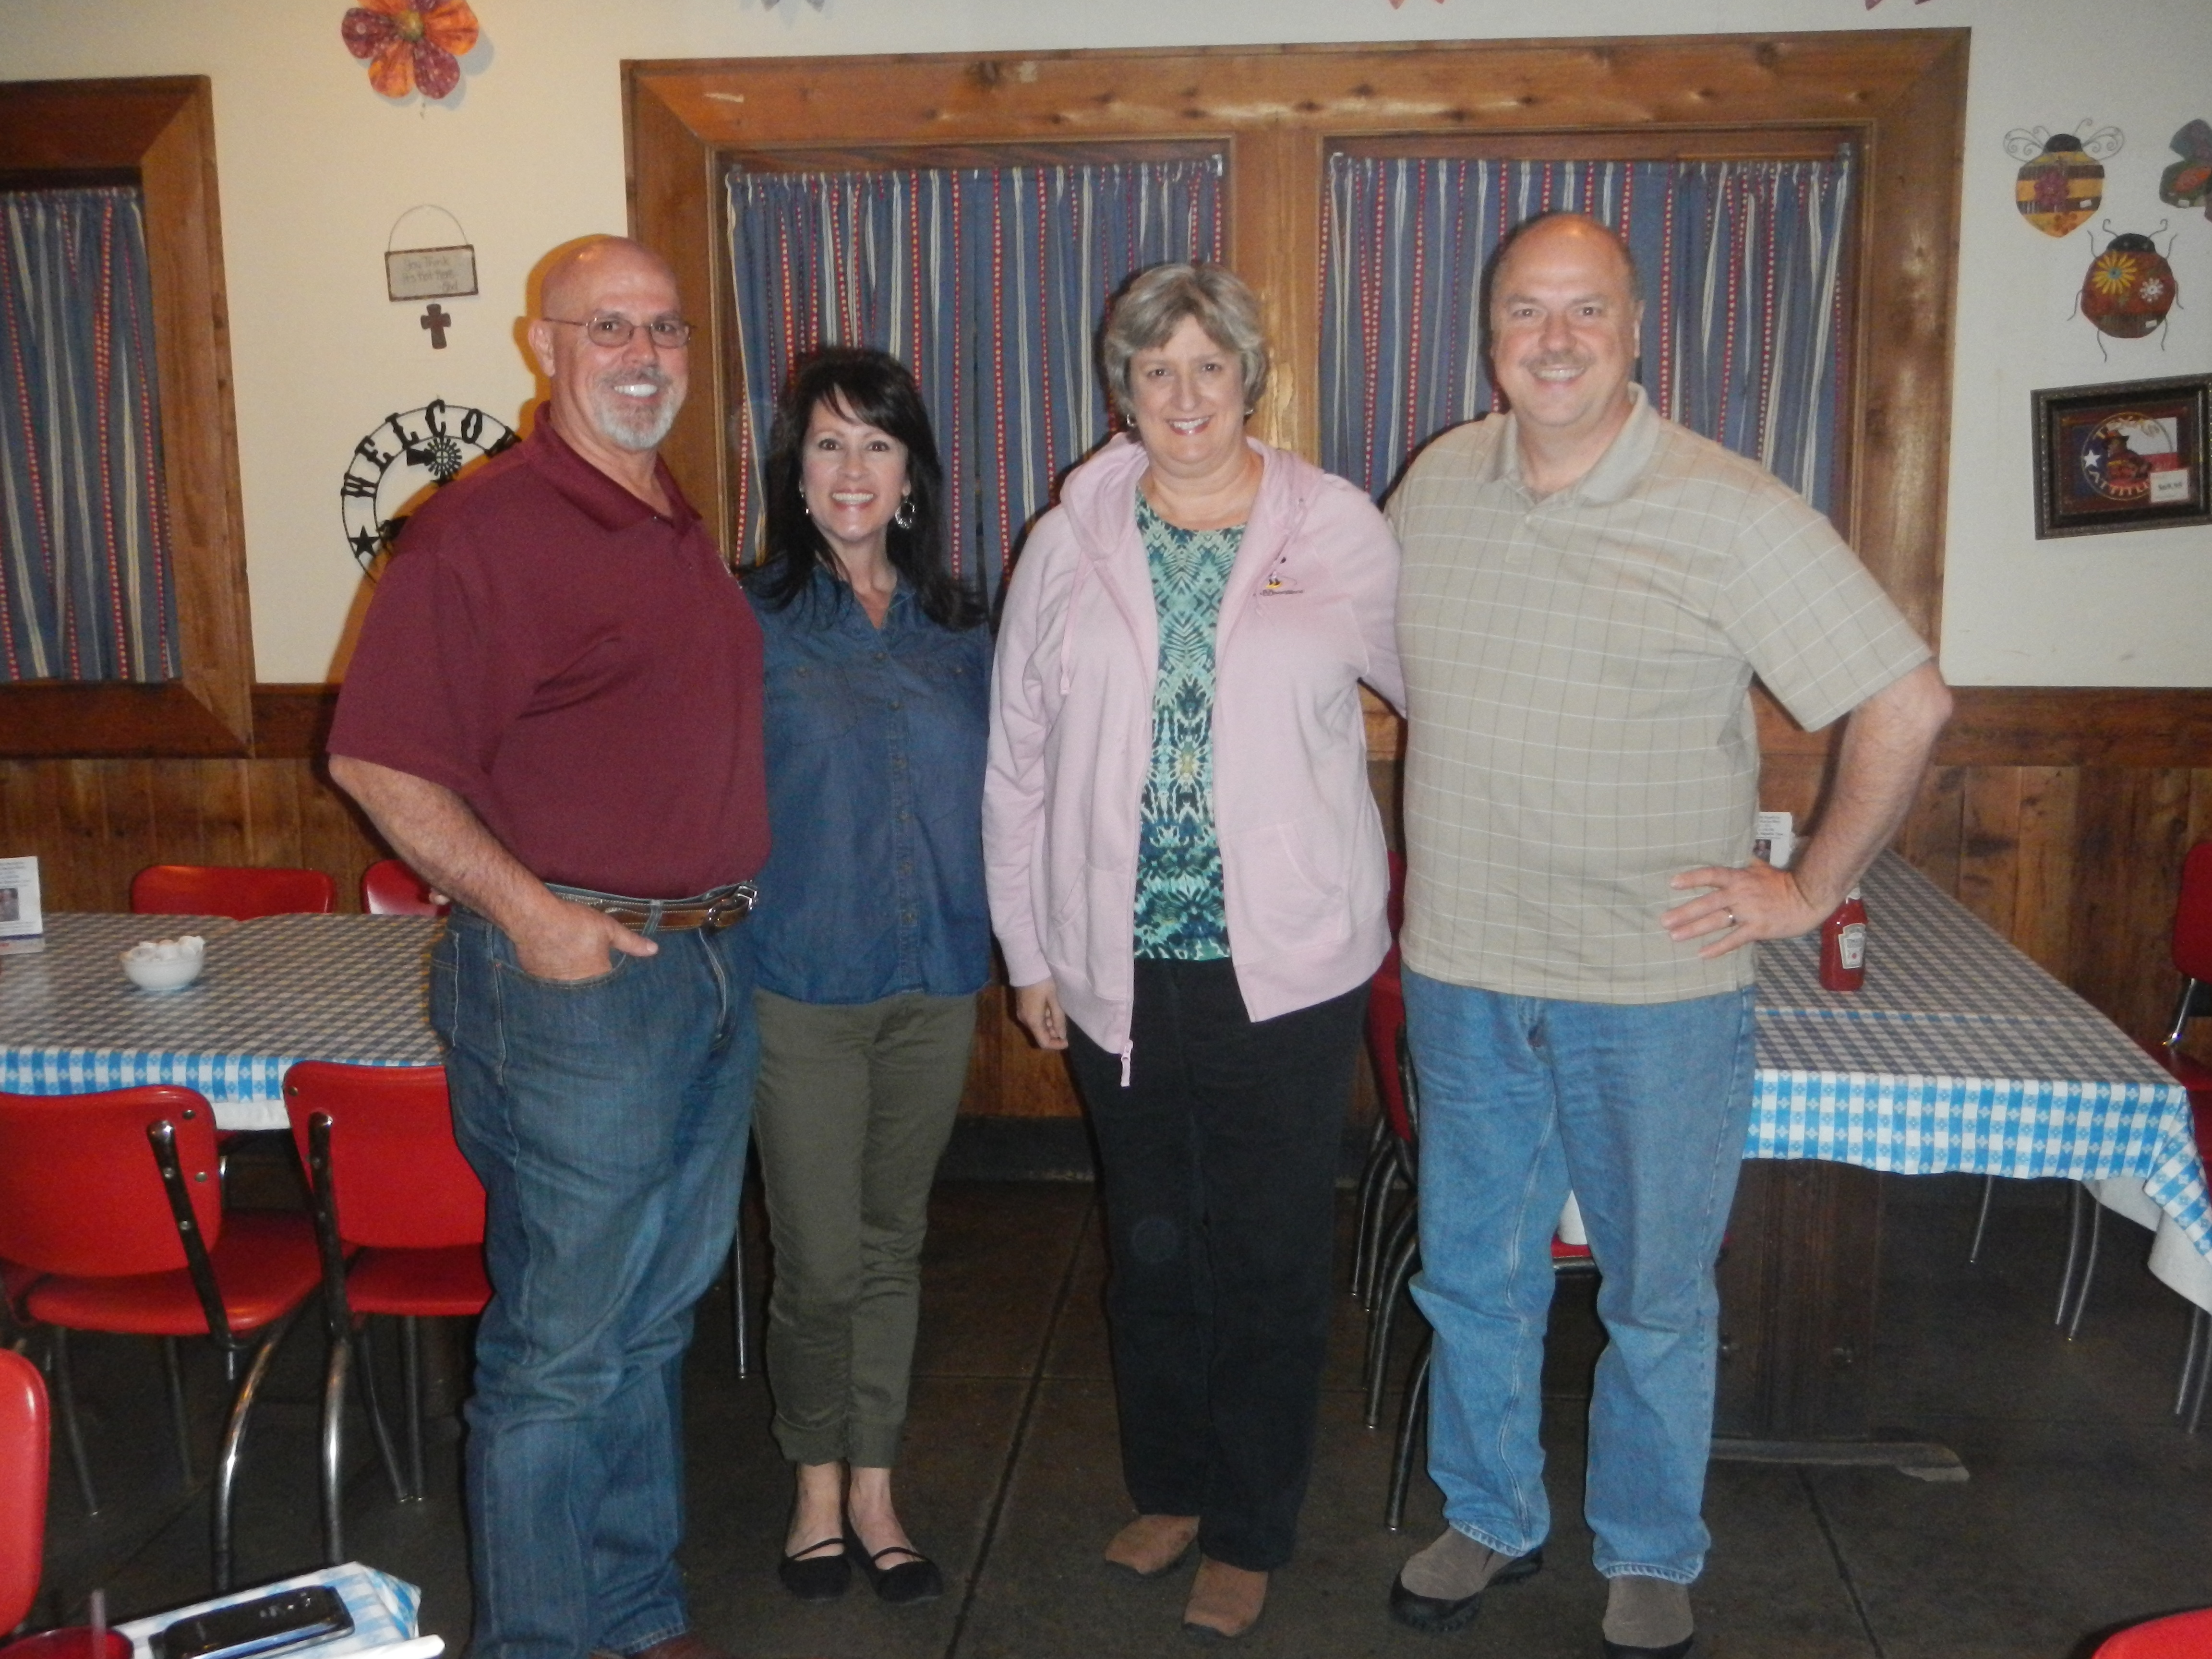 Buddy and Maureen R and us at Goodson's Cafe in Tomball, TX